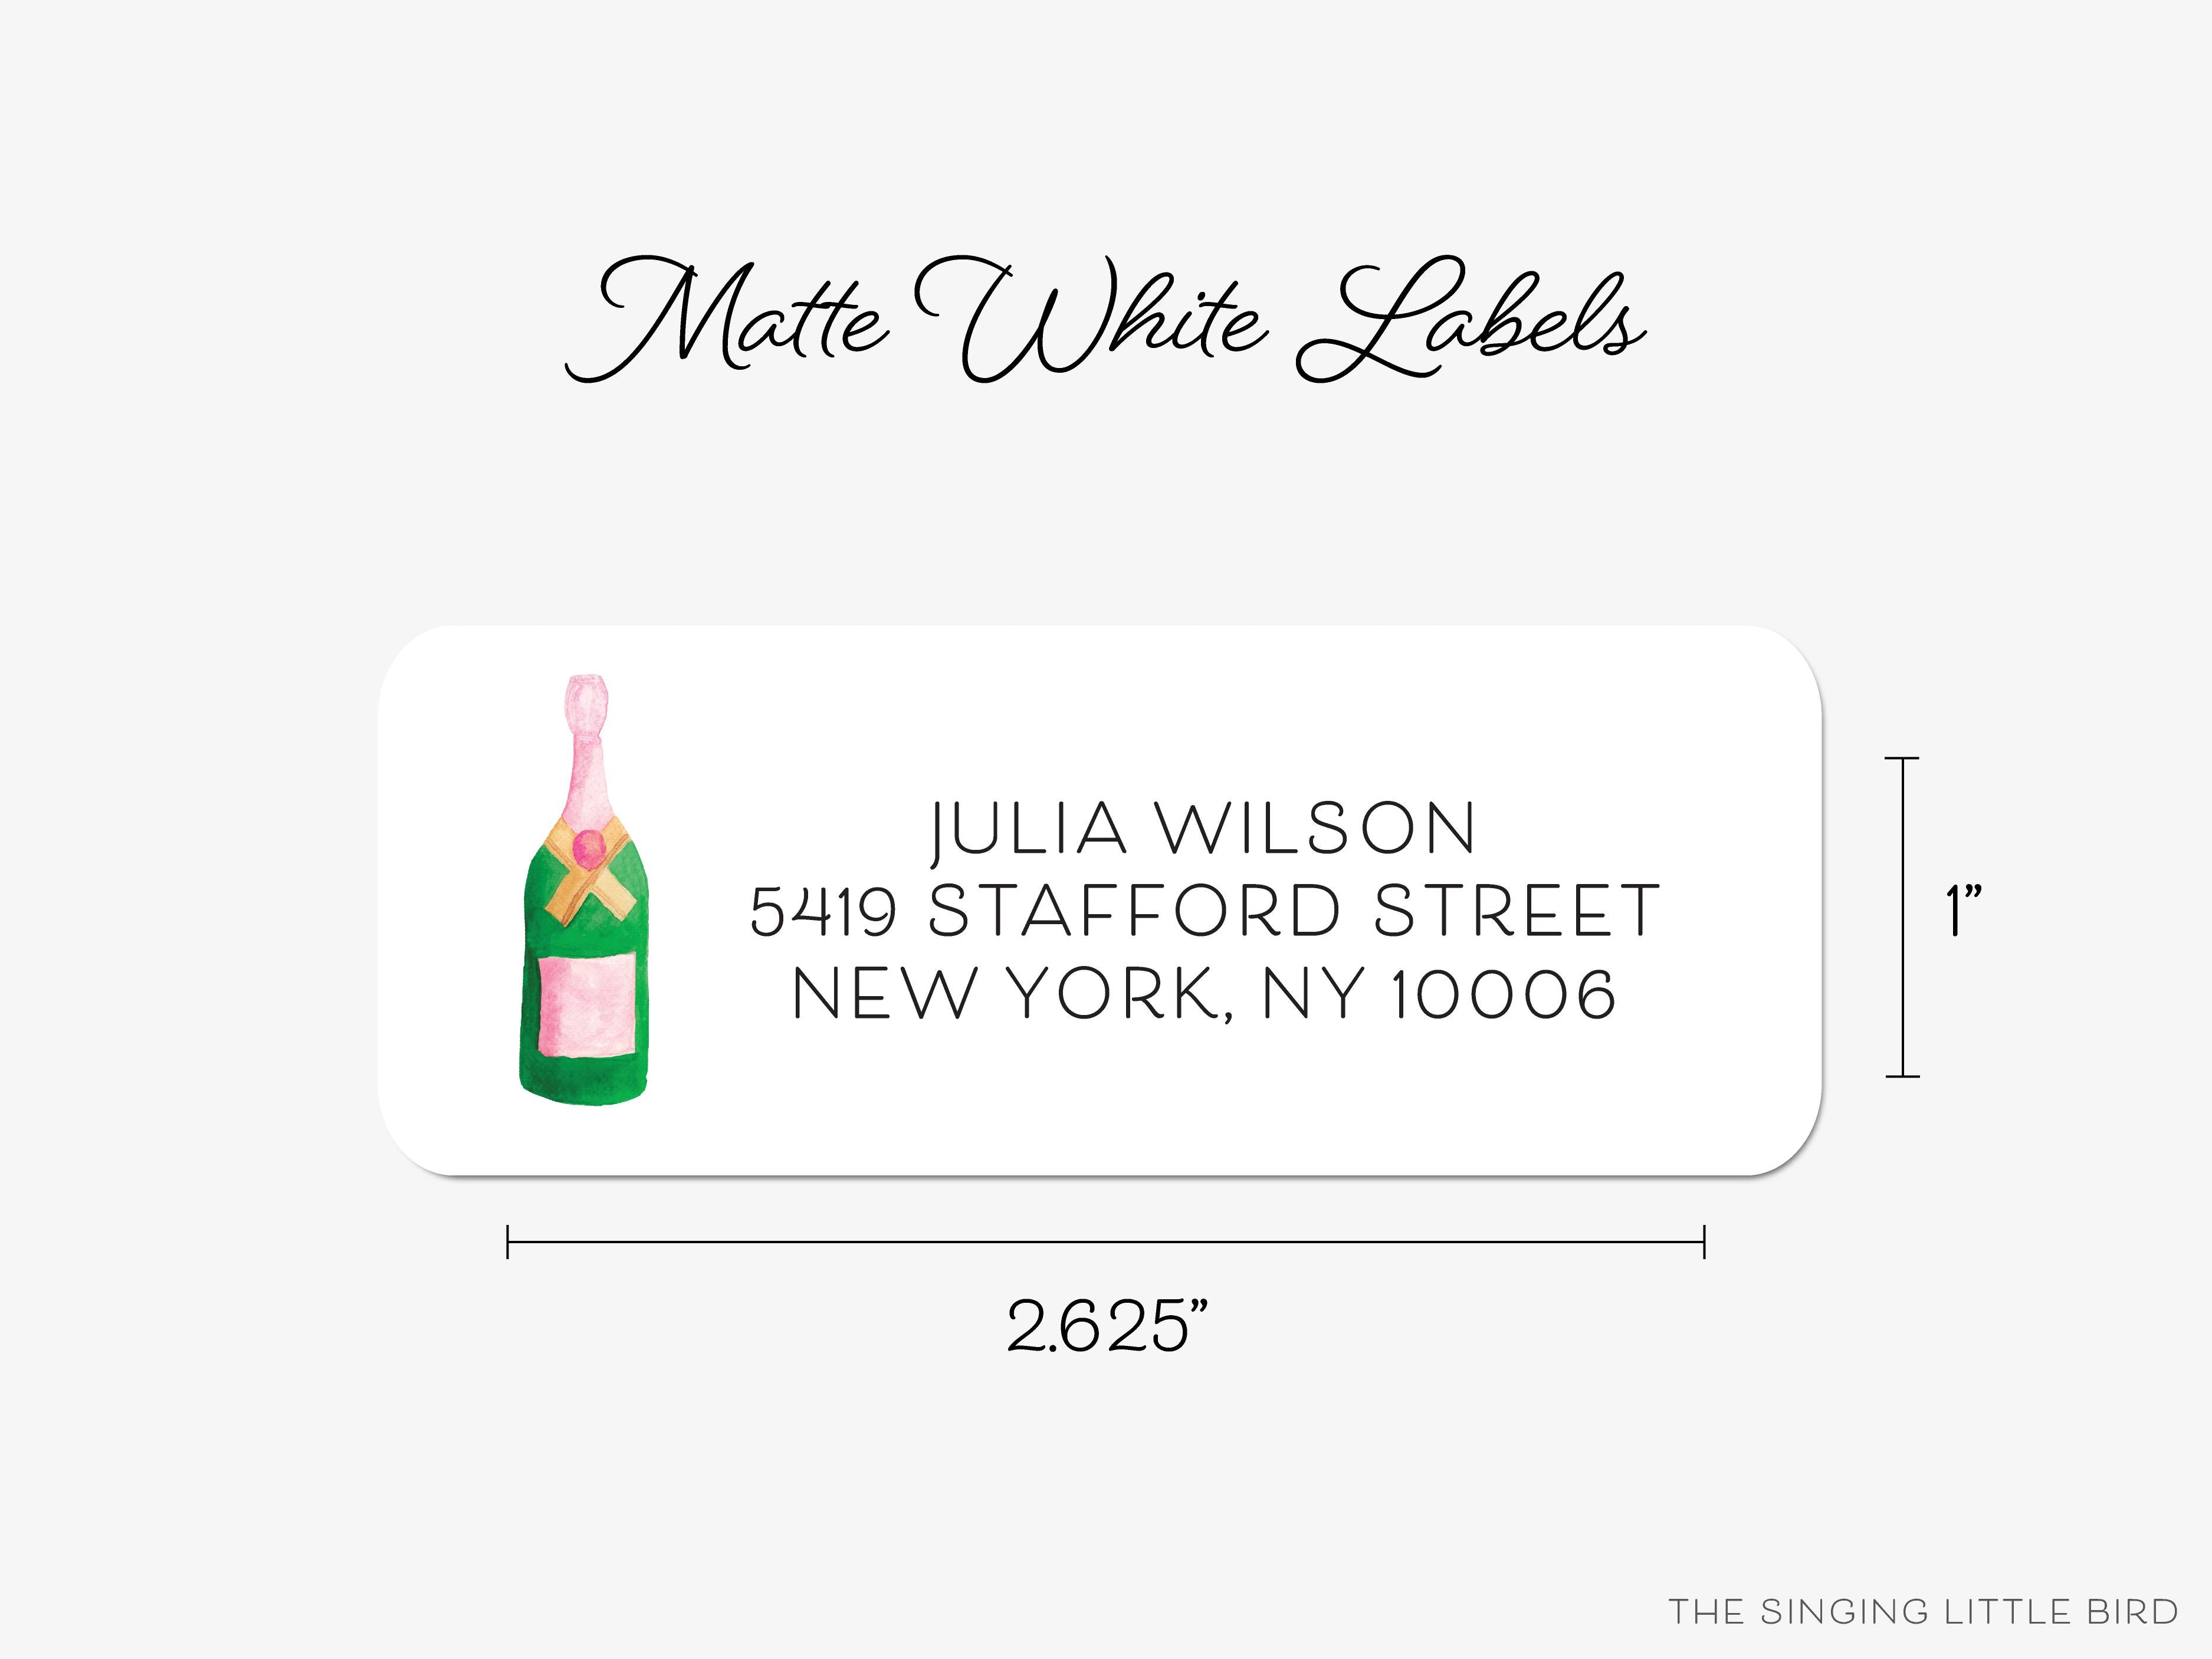 Champagne Bottle Return Address Labels-These personalized return address labels are 2.625" x 1" and feature our hand-painted watercolor Champagne Bottle, printed in the USA on beautiful matte finish labels. These make great gifts for yourself or the bubbly lover.-The Singing Little Bird